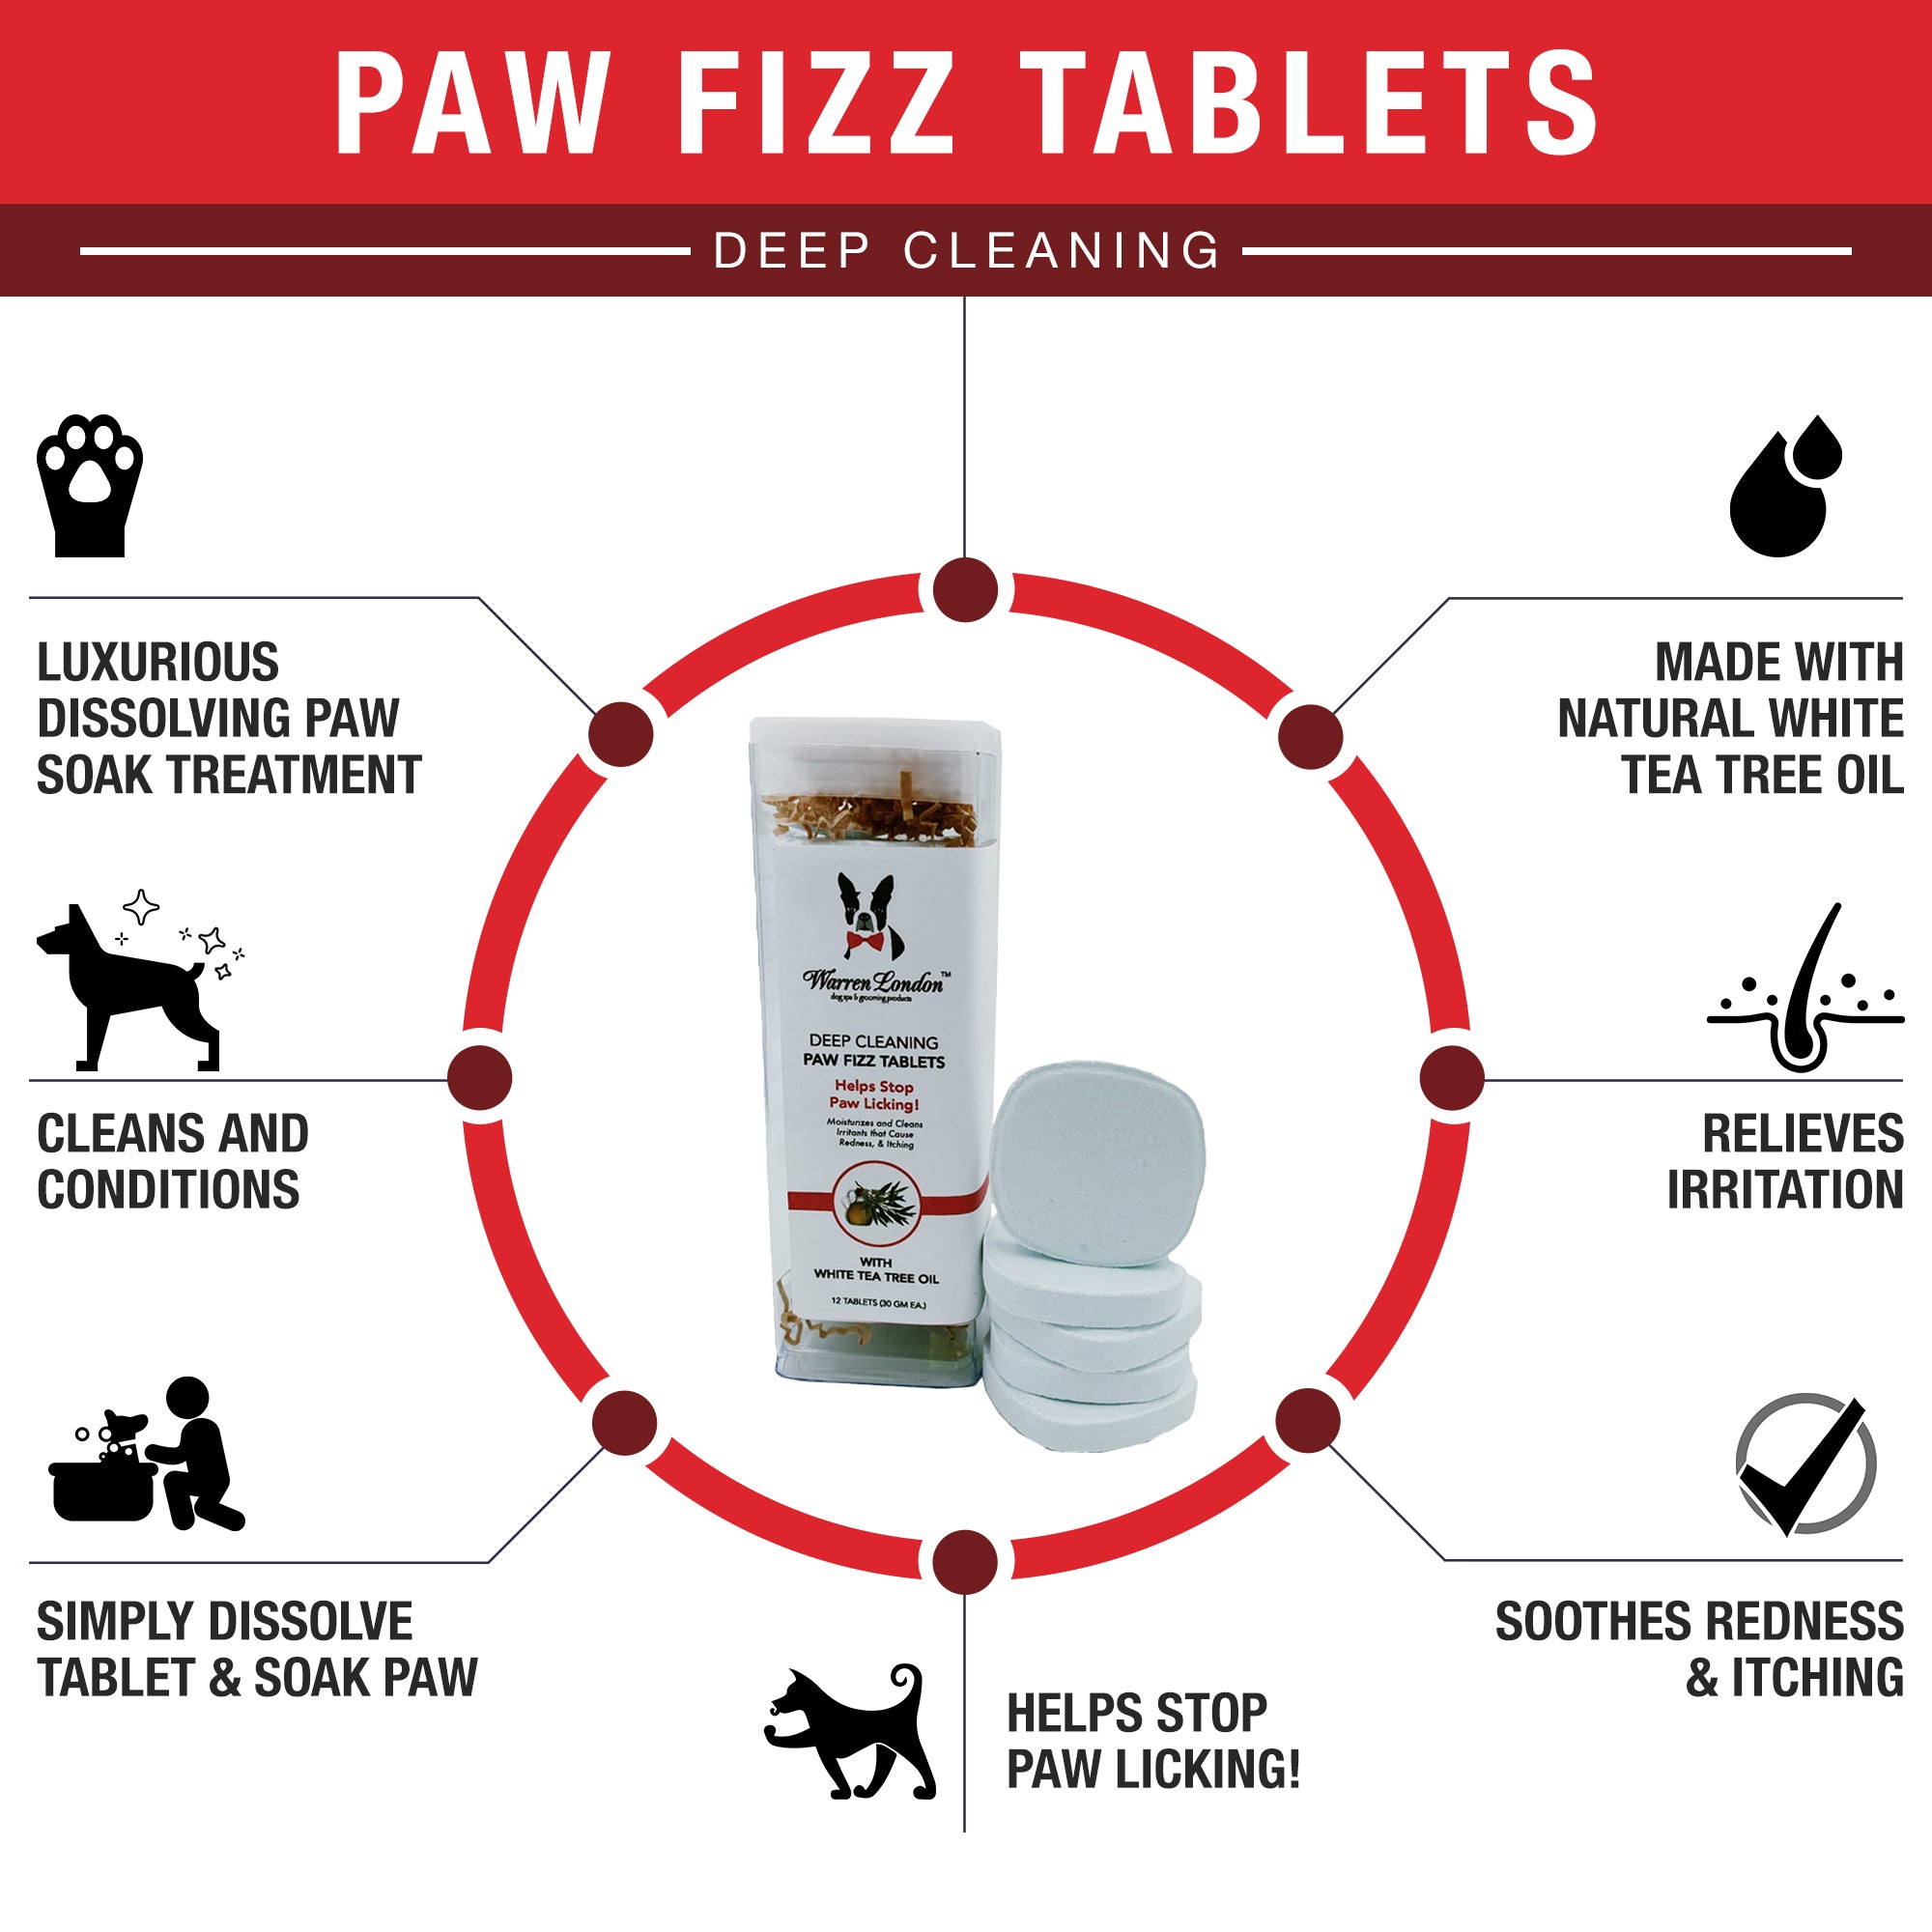 Deep Cleaning Paw Fizz Tablets - Paw Soak Helps Eliminate Paw Licking Spa Product Warren London 